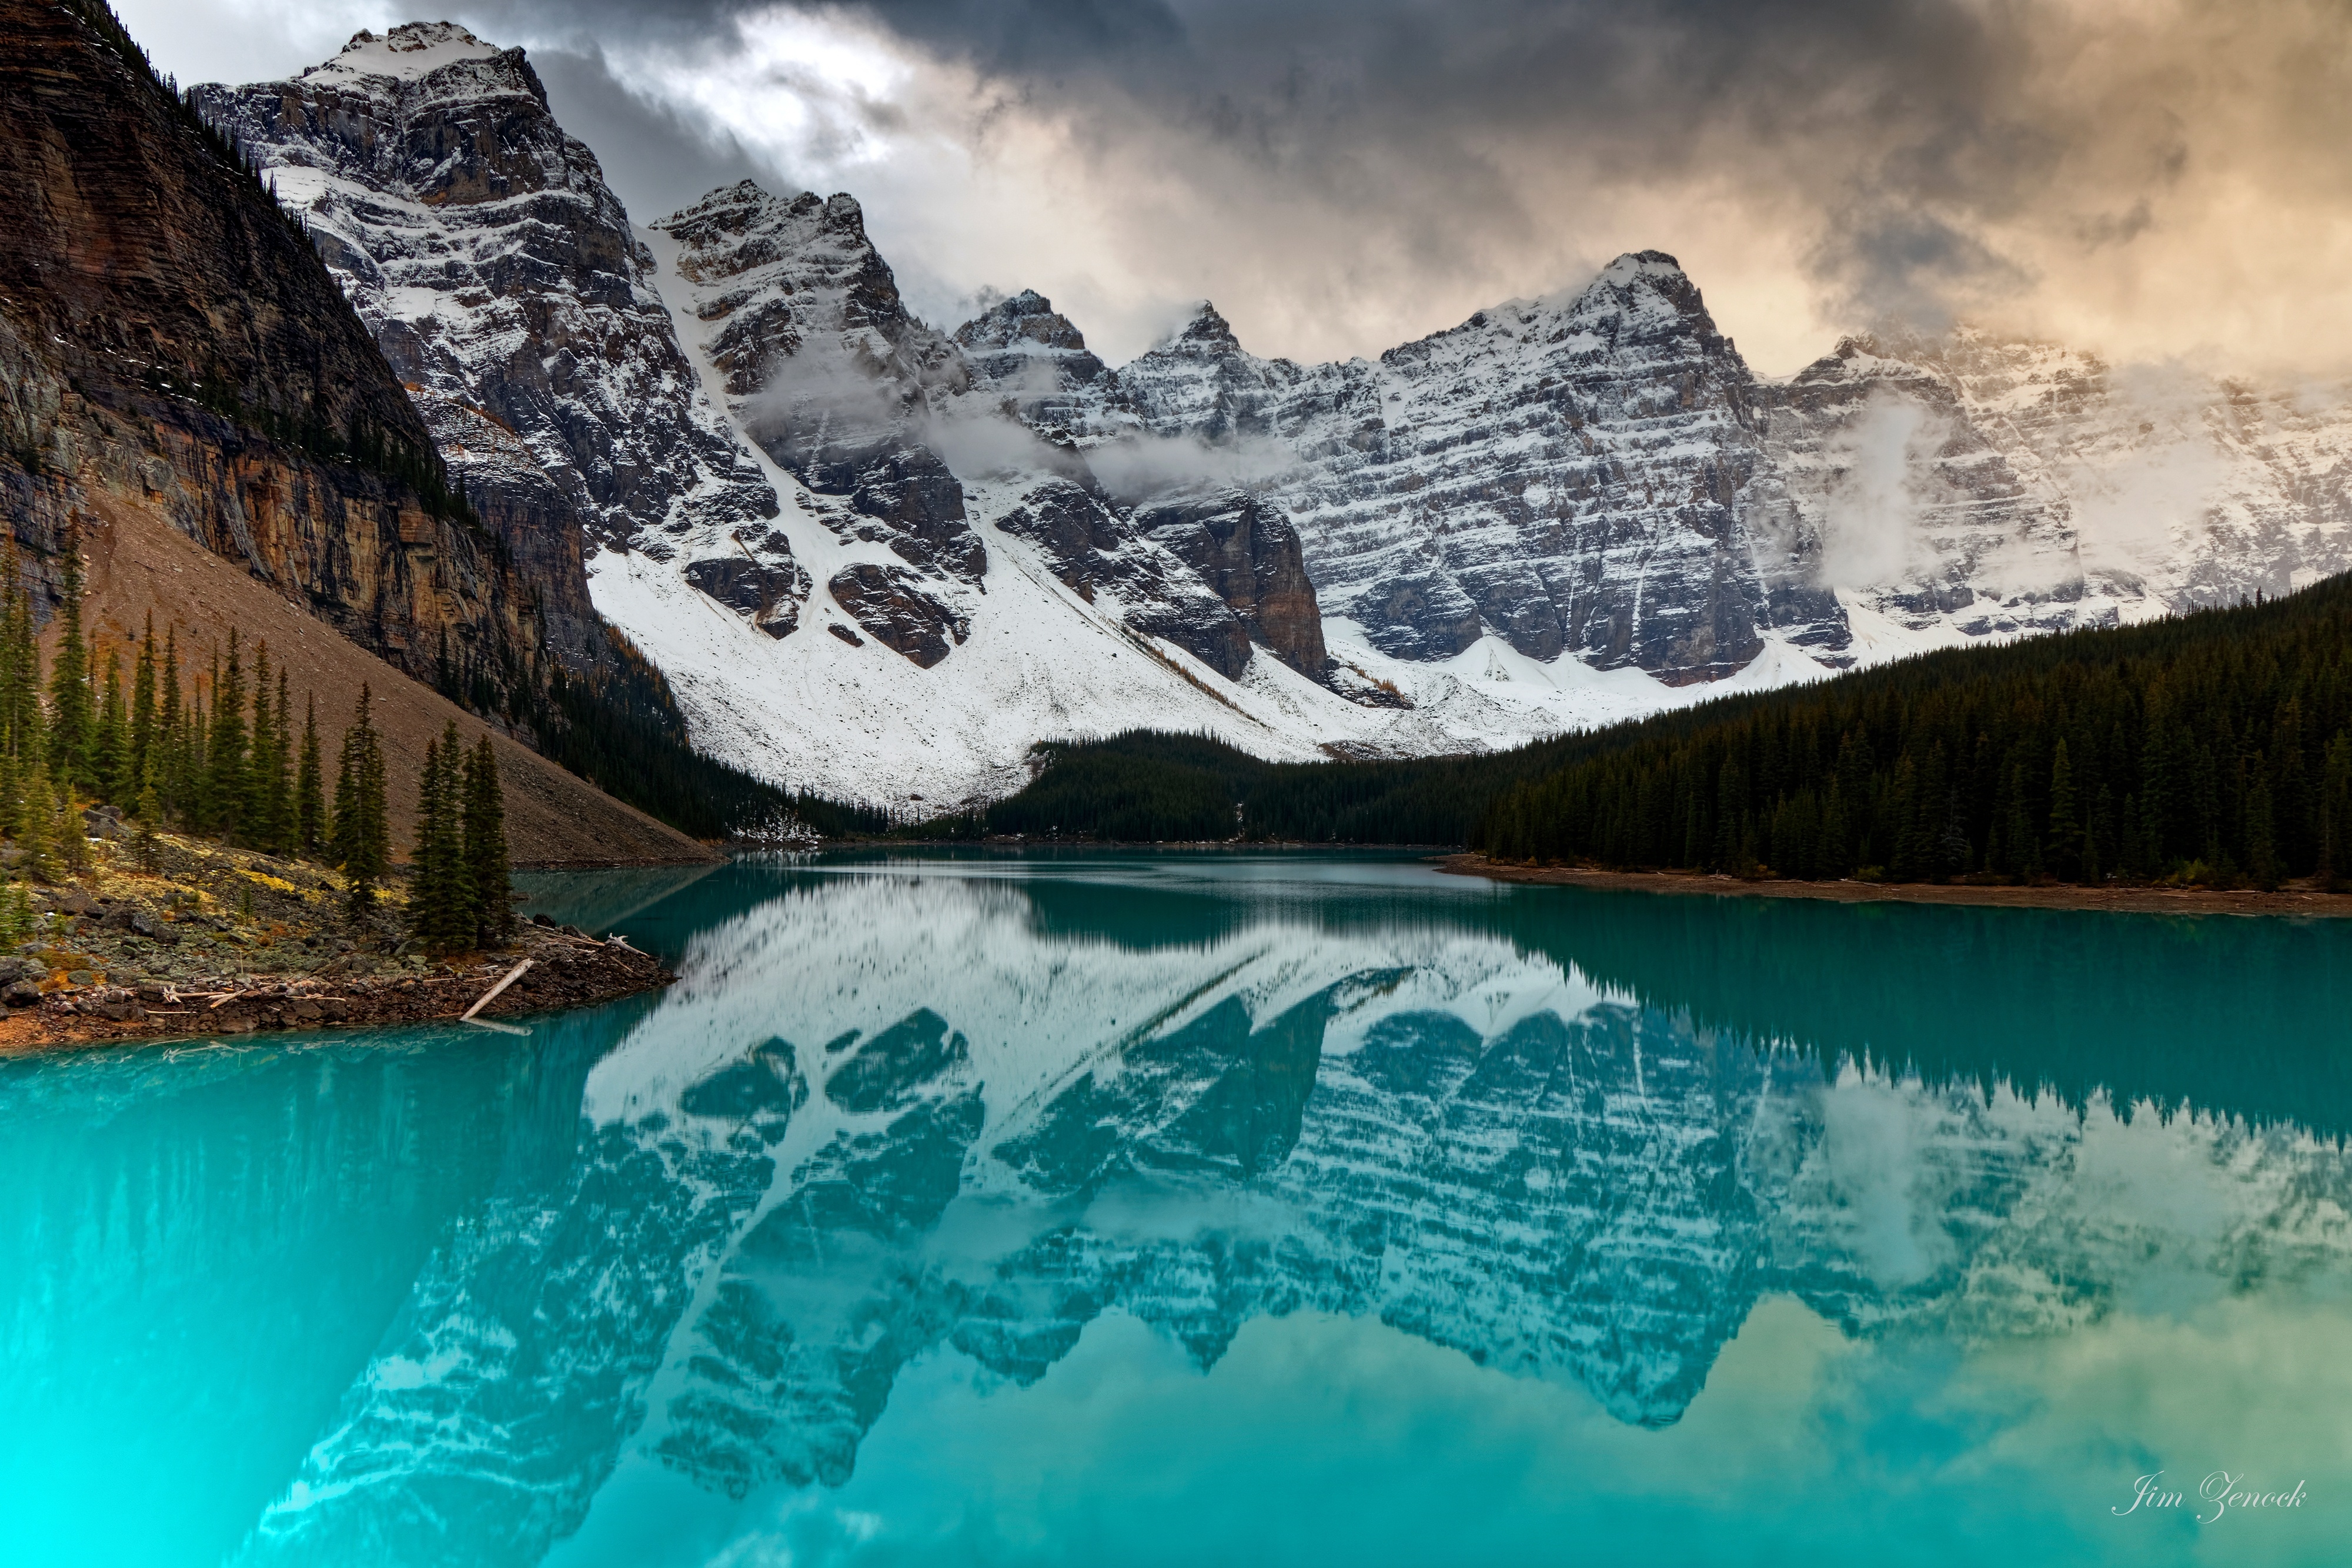 HD wallpaper, Banff National Park, Mountains, Moraine Lake, Reflection, Snow Covered, Forest, Canada, Scenery, Alberta